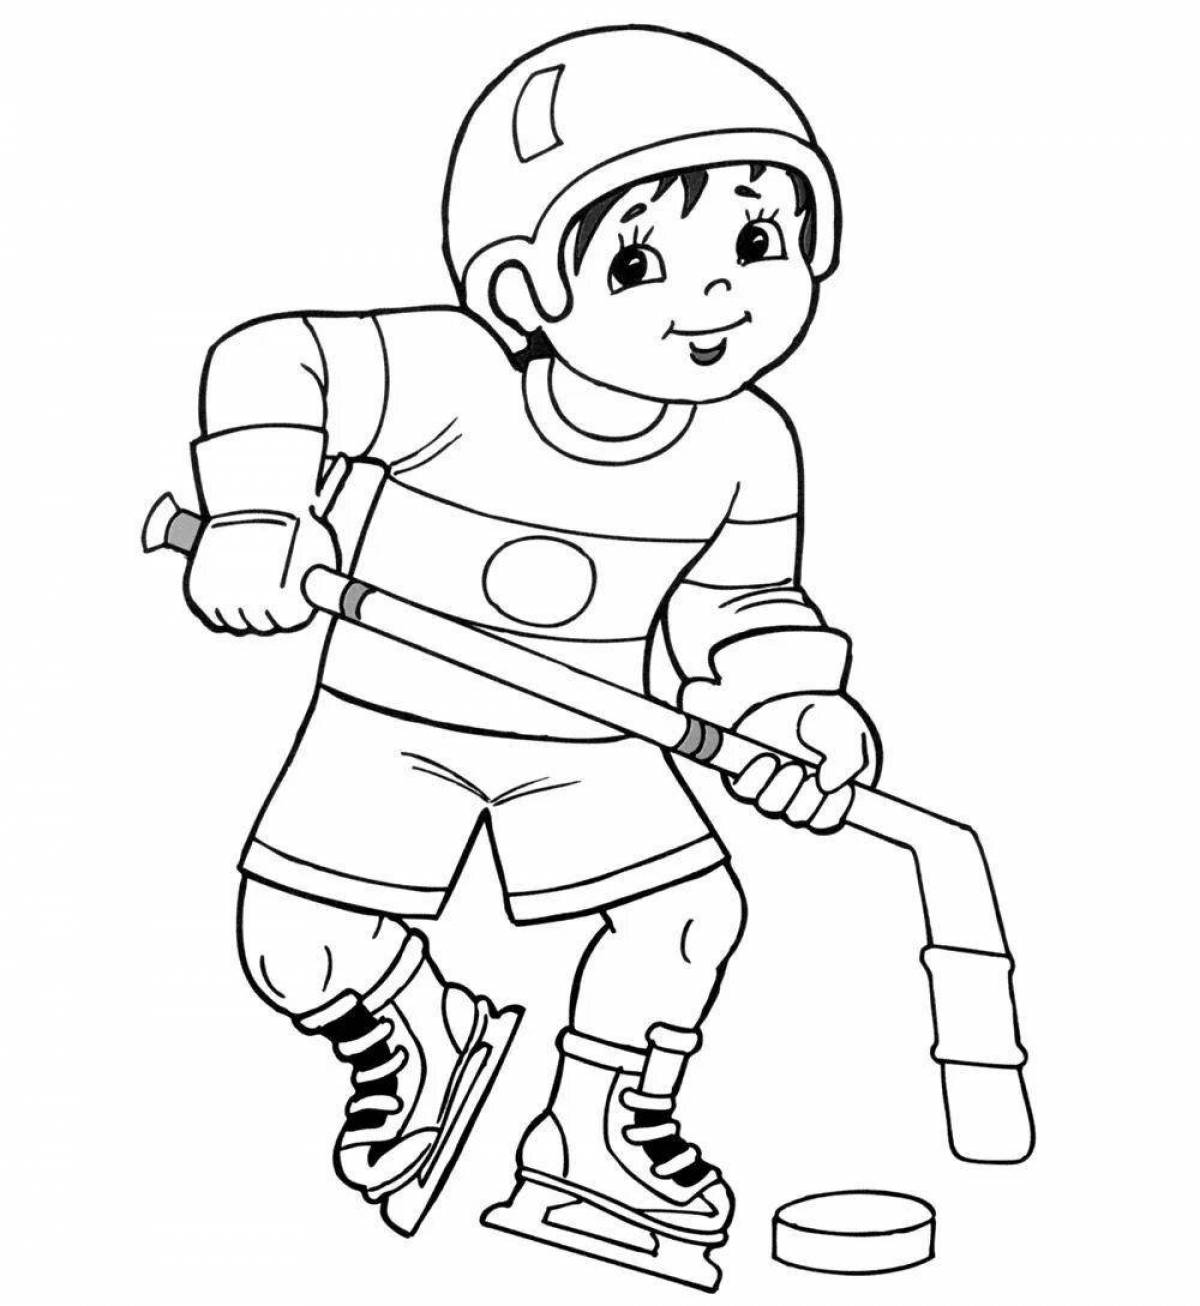 Outstanding sports coloring book for preschoolers